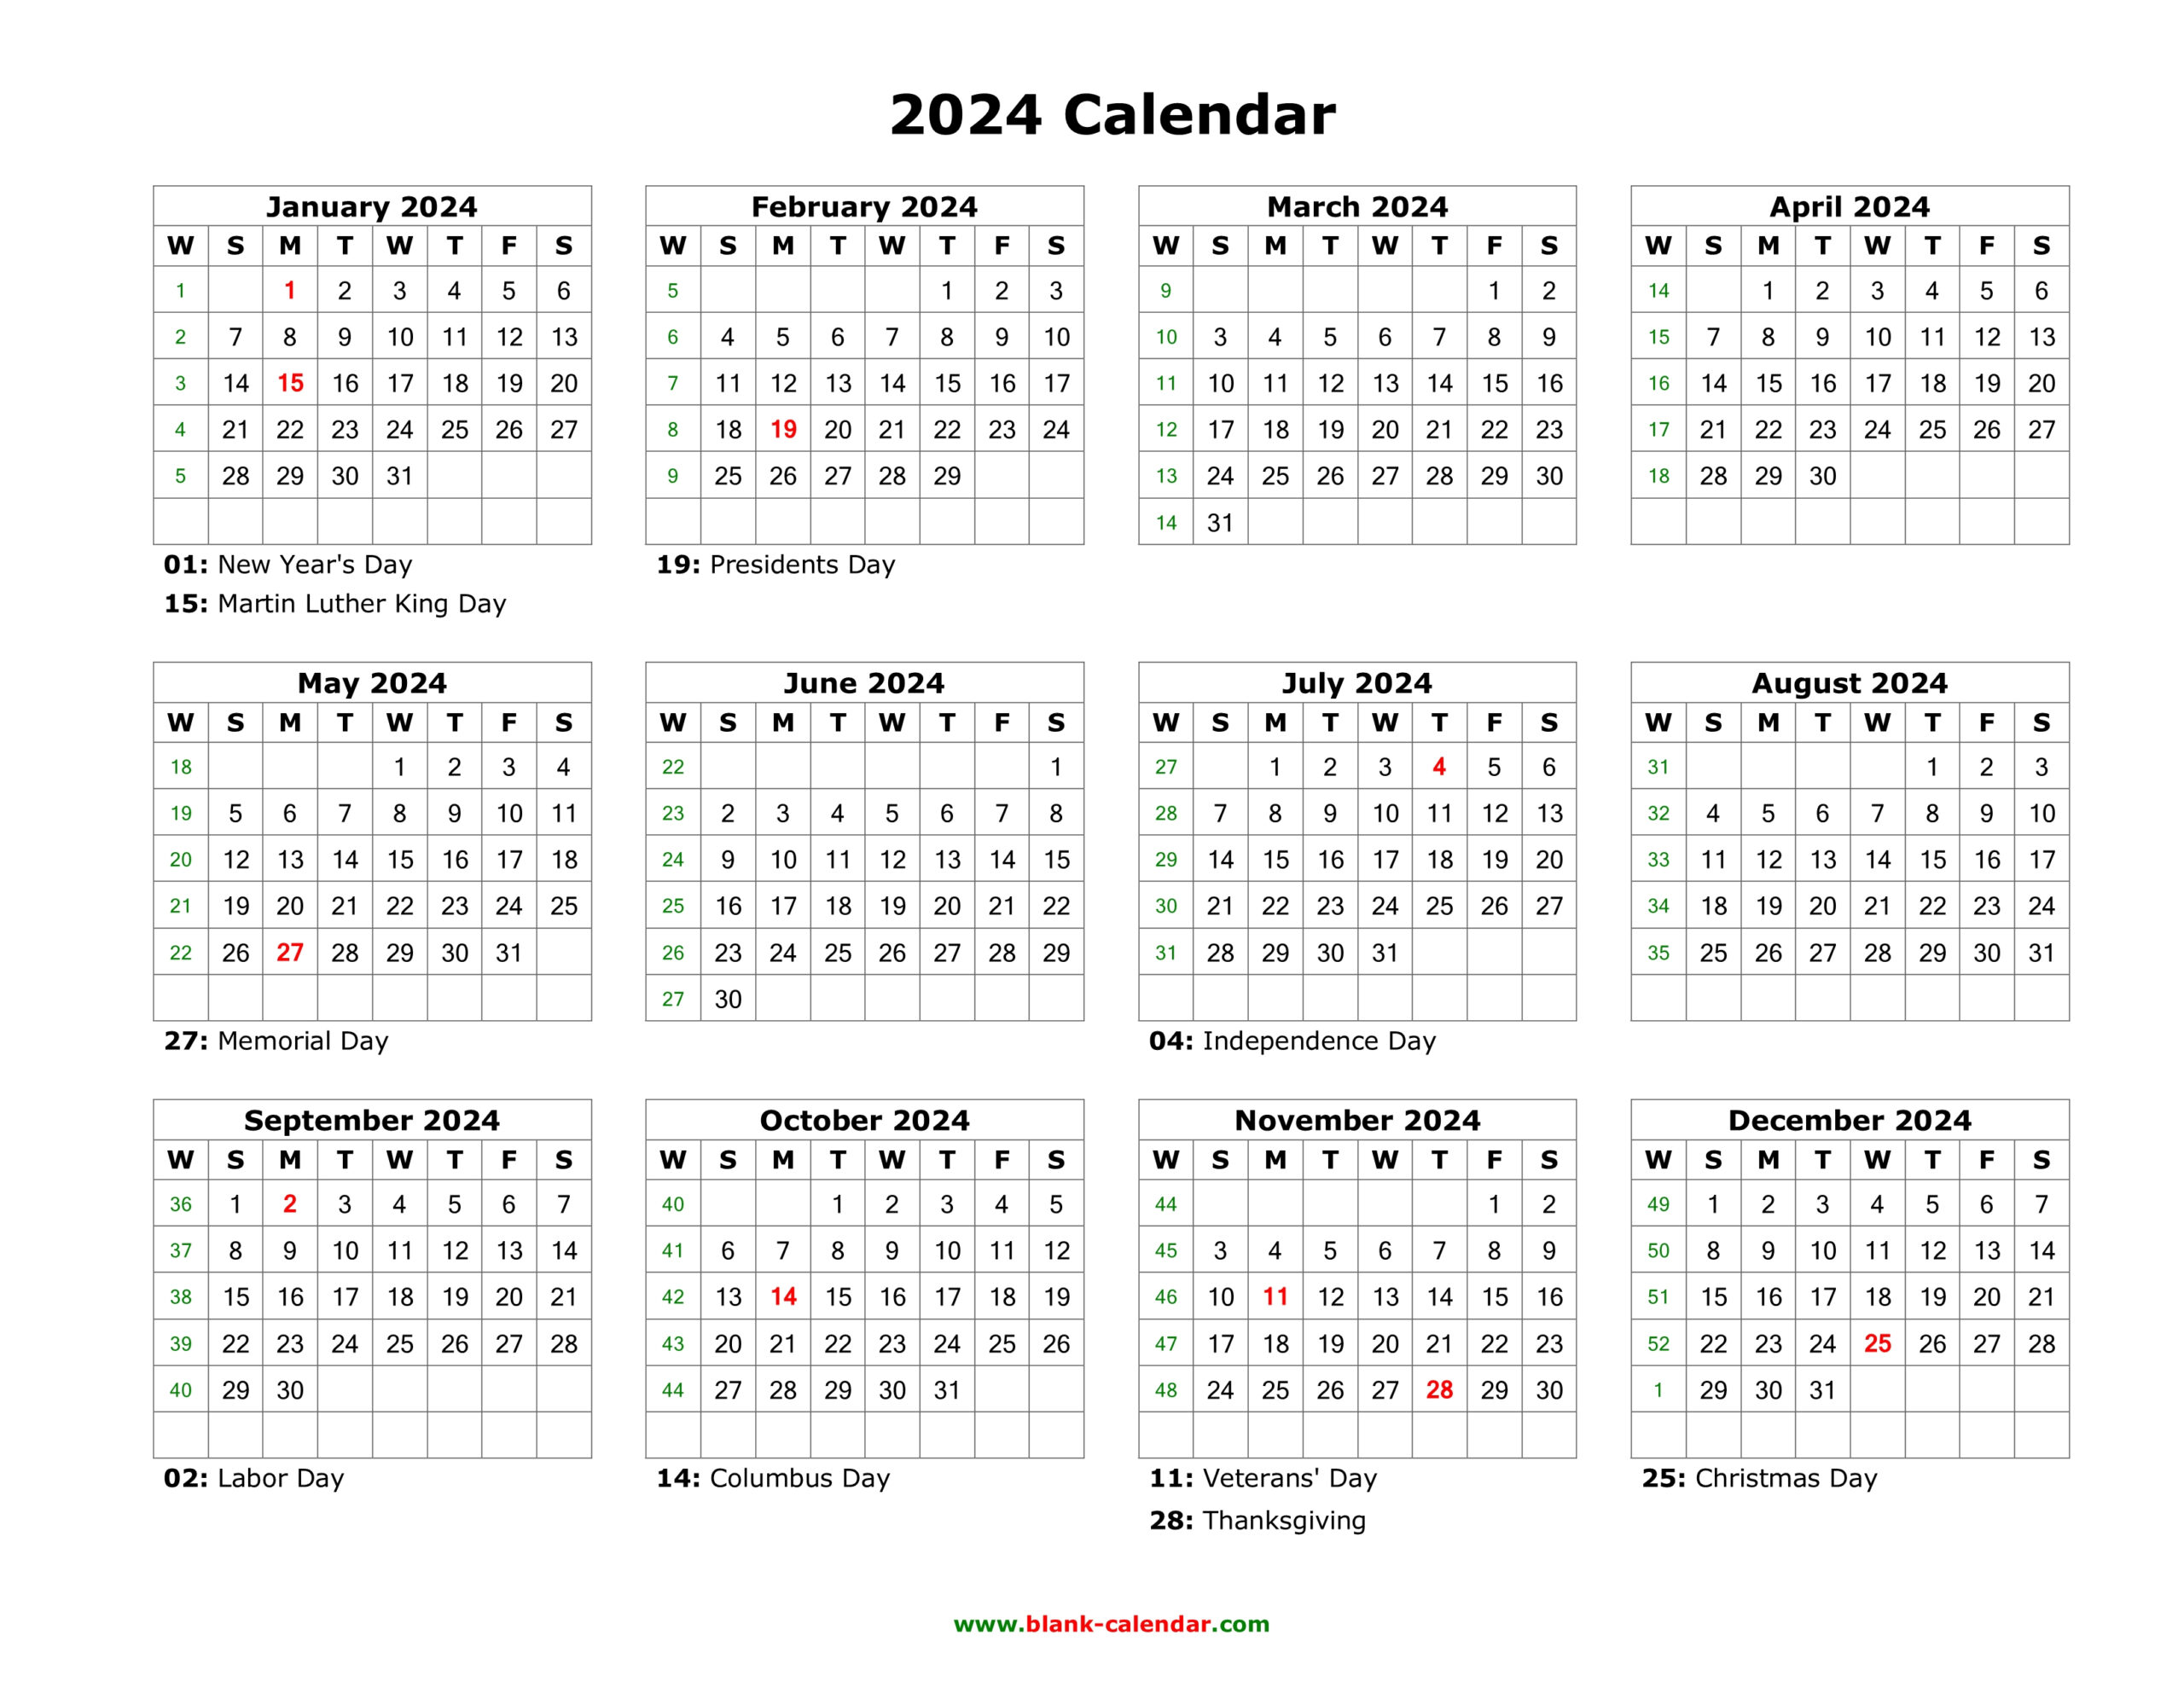 Blank Calendar 2024 | Free Download Calendar Templates for Free Printable 2024 Calendar With Holidays And Observances